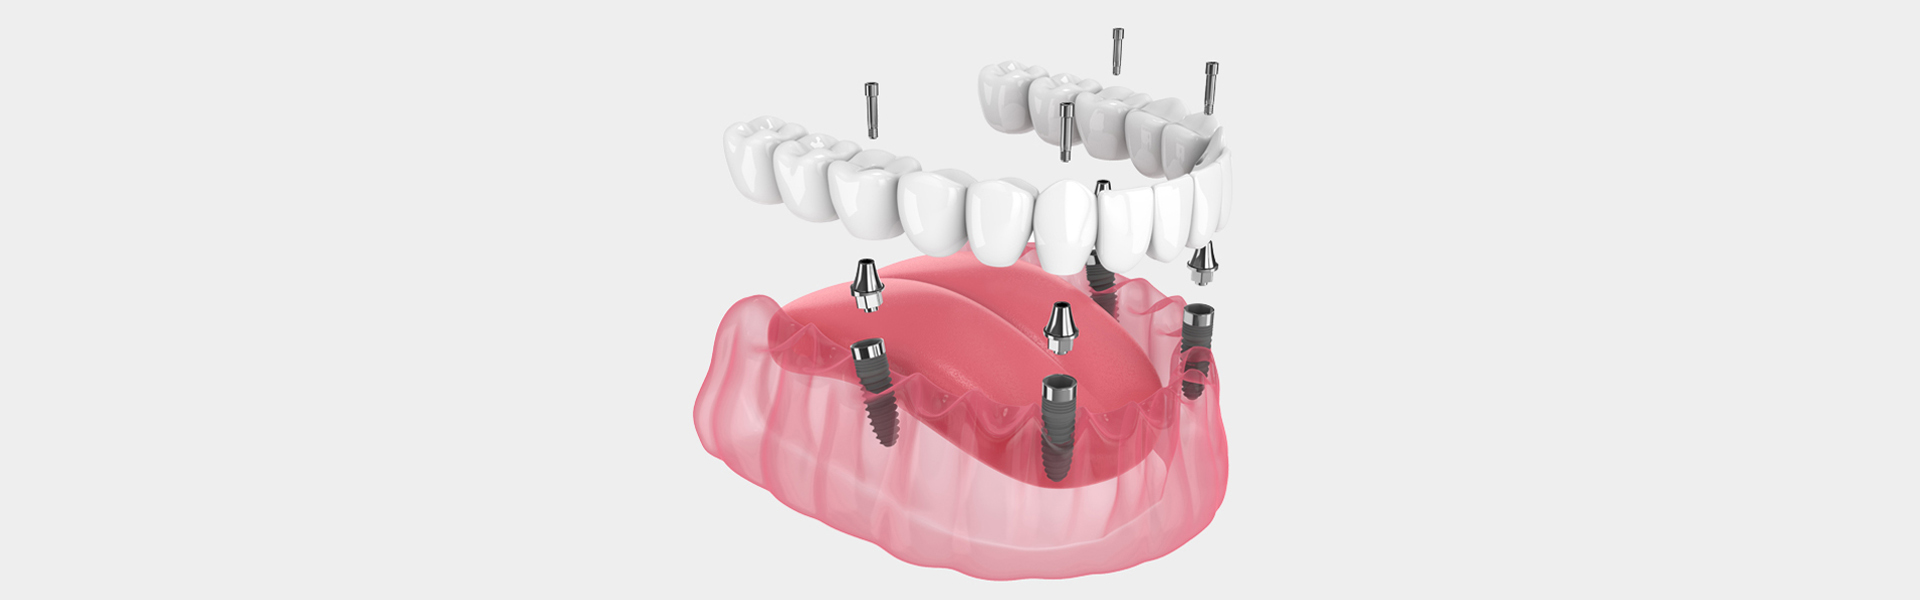 Tips for a Comfortable Recovery After All-on-4 Dental Implants